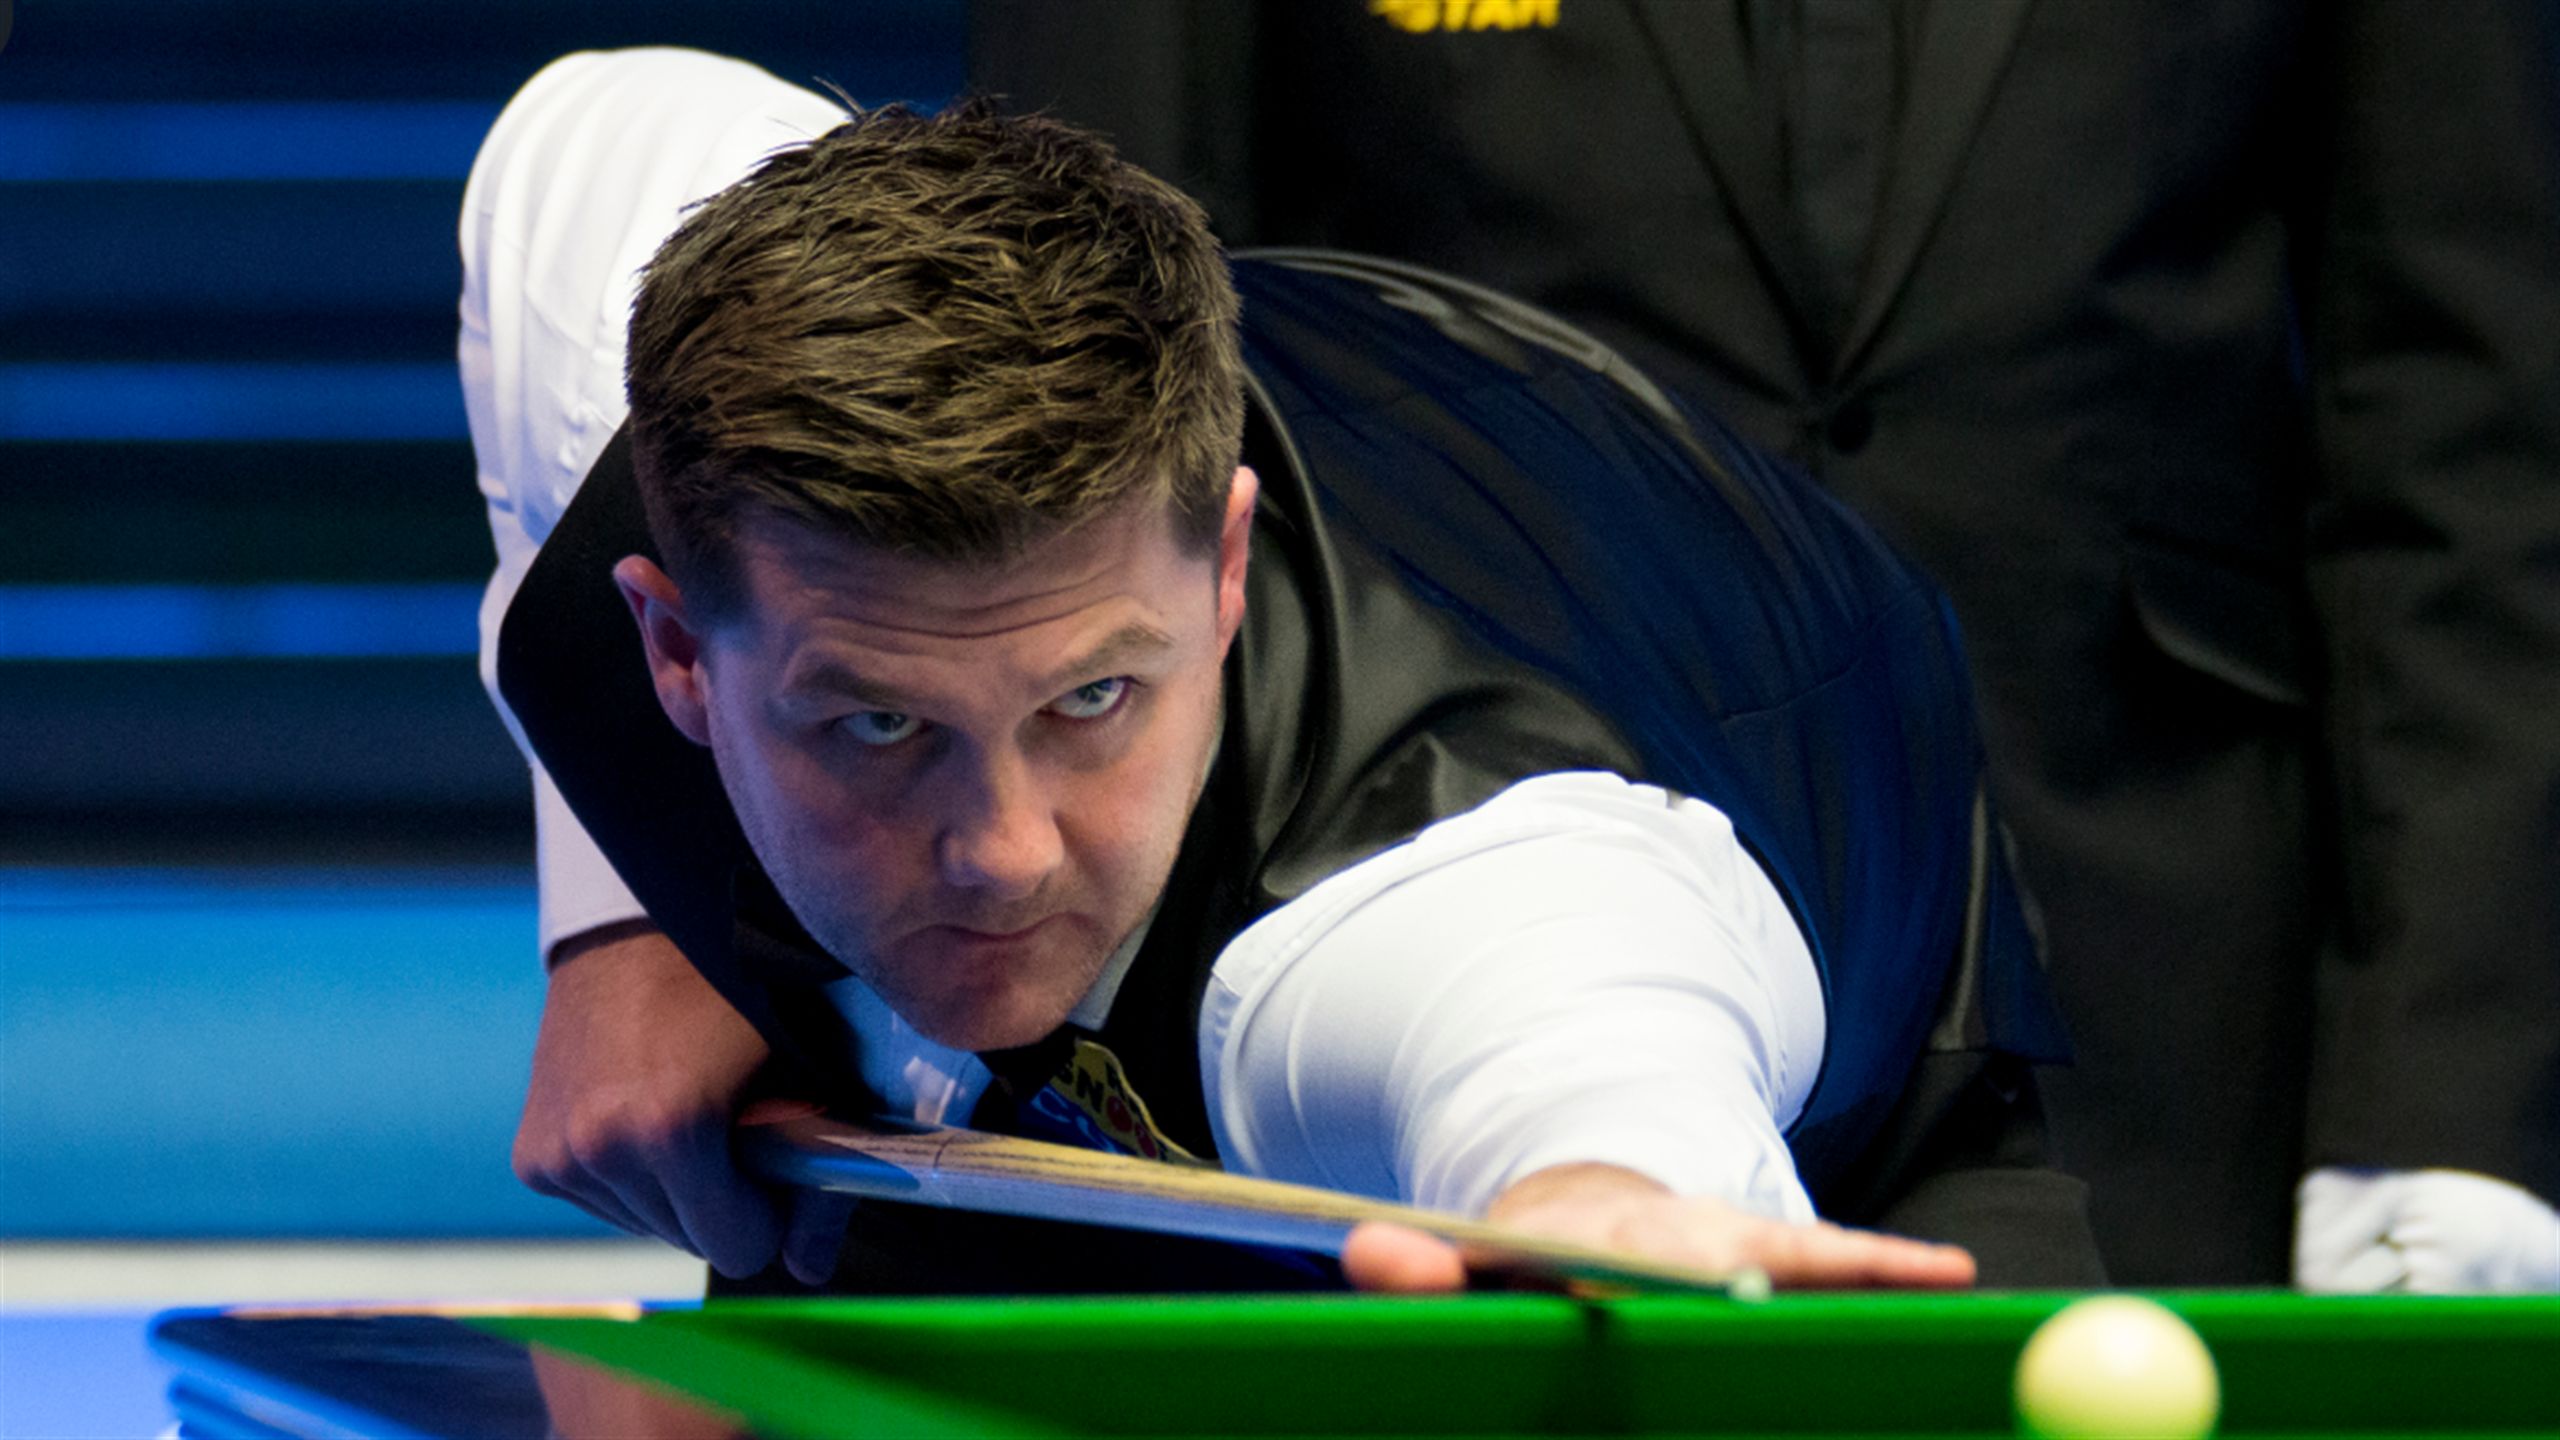 British Open snooker 2022 - Latest scores, results, schedule, order of play, Ronnie OSullivan back in action